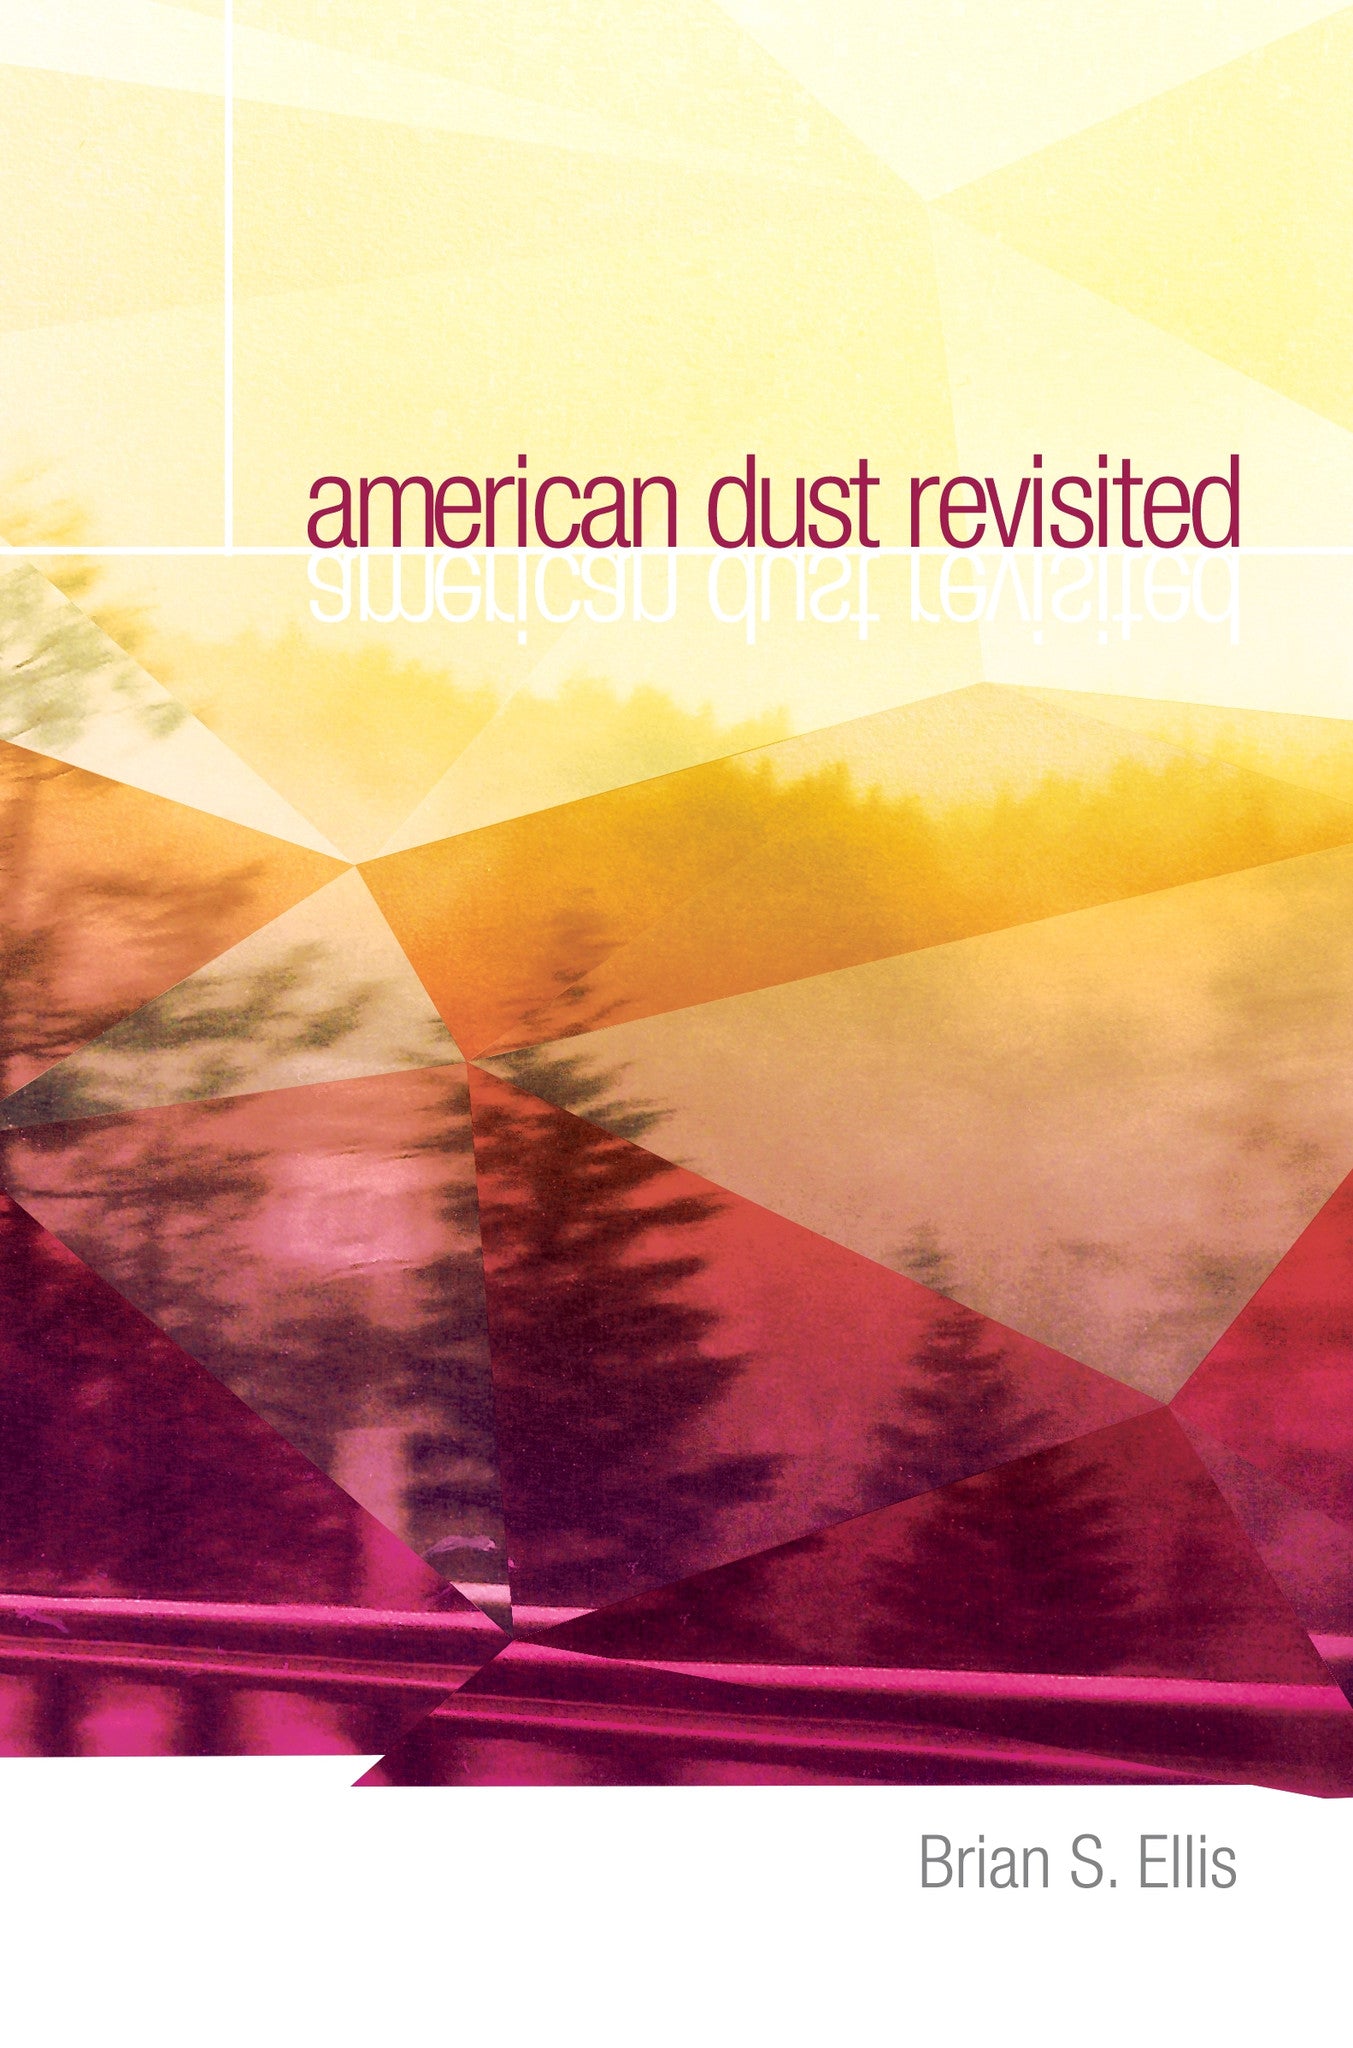 American Dust Revisited by Brian S. Ellis